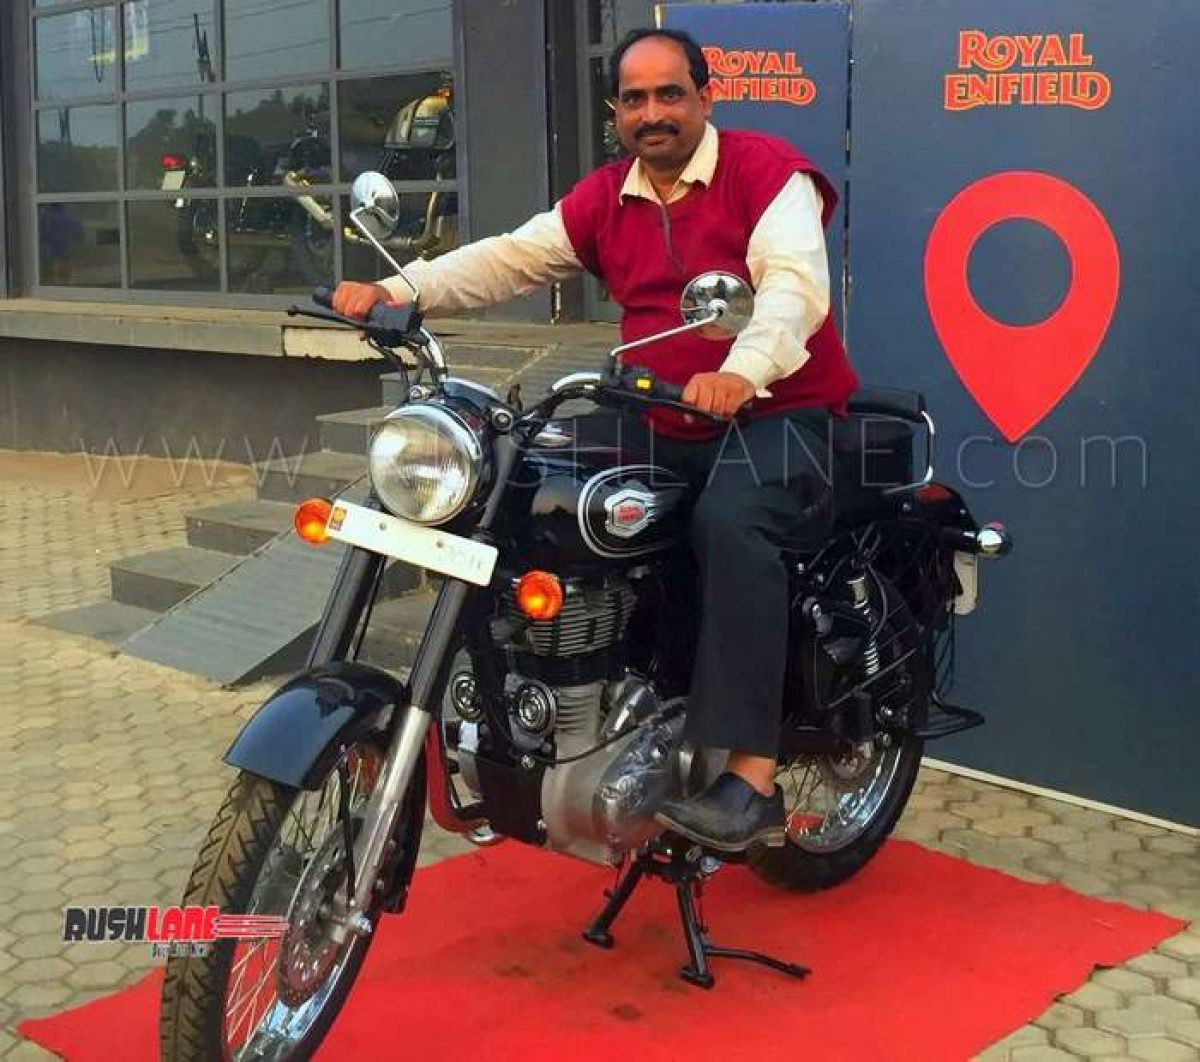 2019 Royal Enfield Bullet 500 ABS launch price Rs 1.87 L ex-showroom